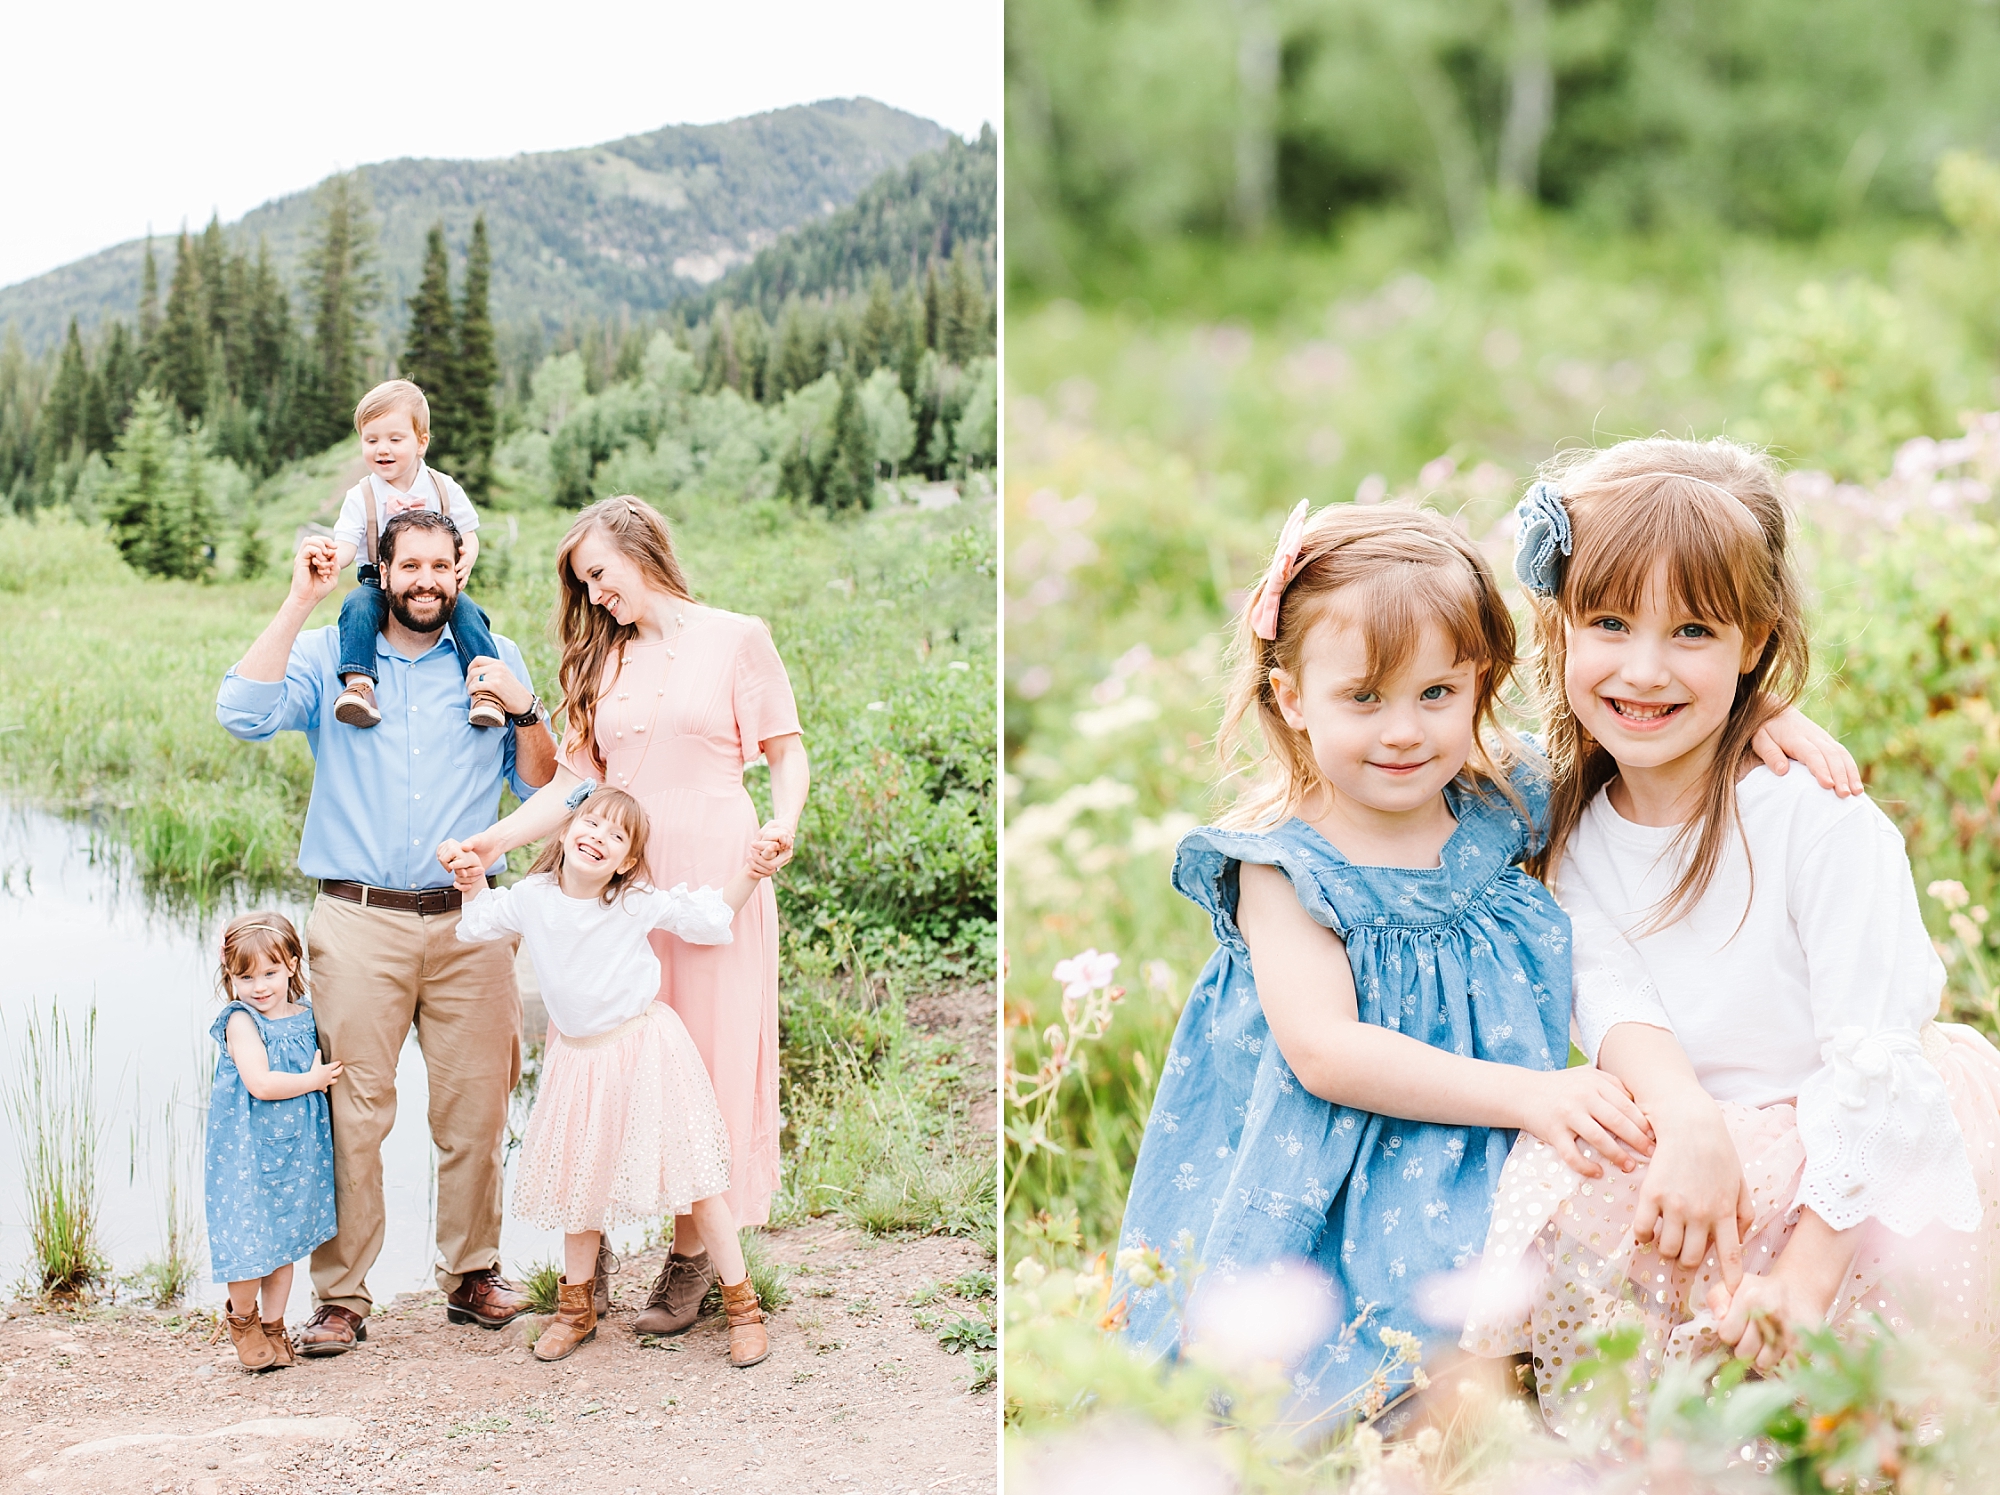 Outfit ideas for your upcoming family session